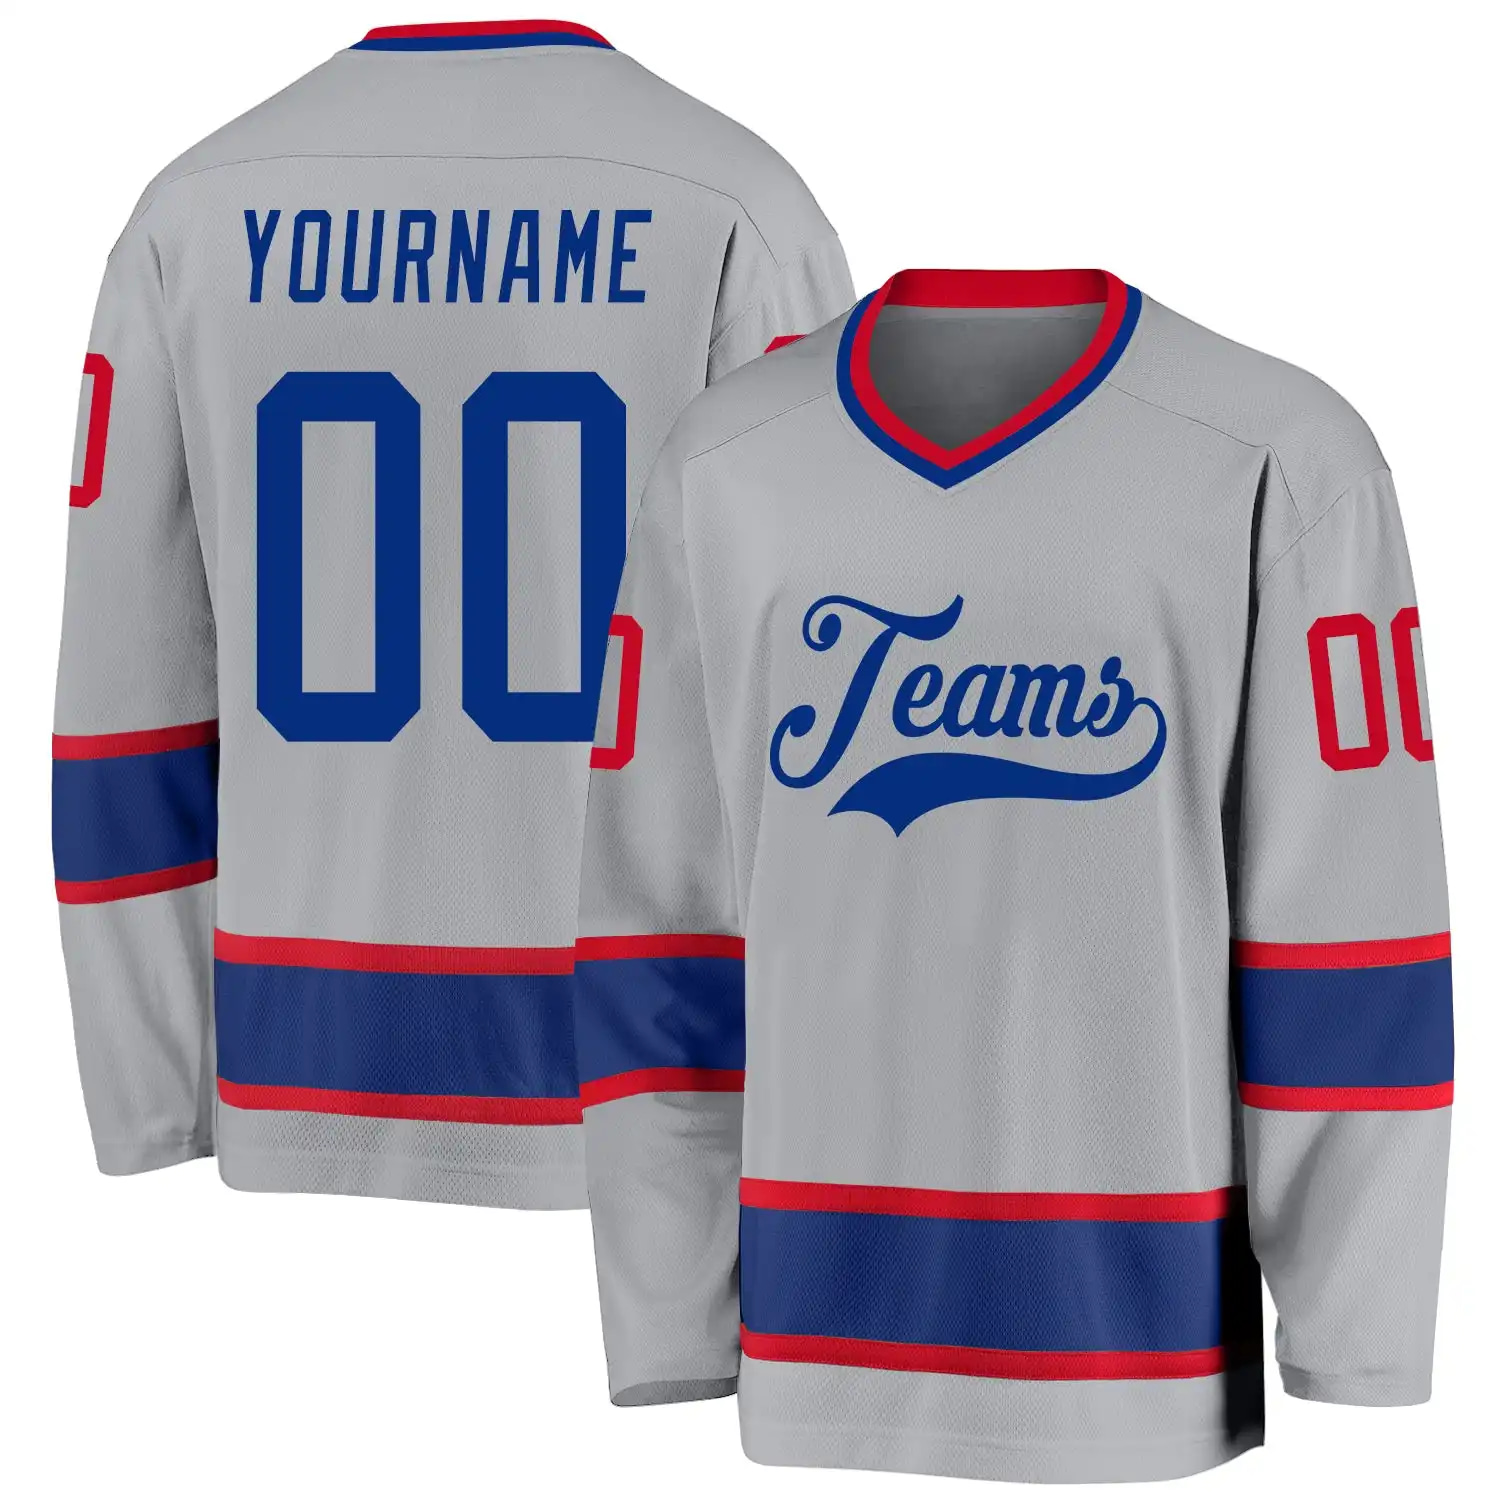 Stitched And Print Gray Royal-Red Hockey Jersey Custom